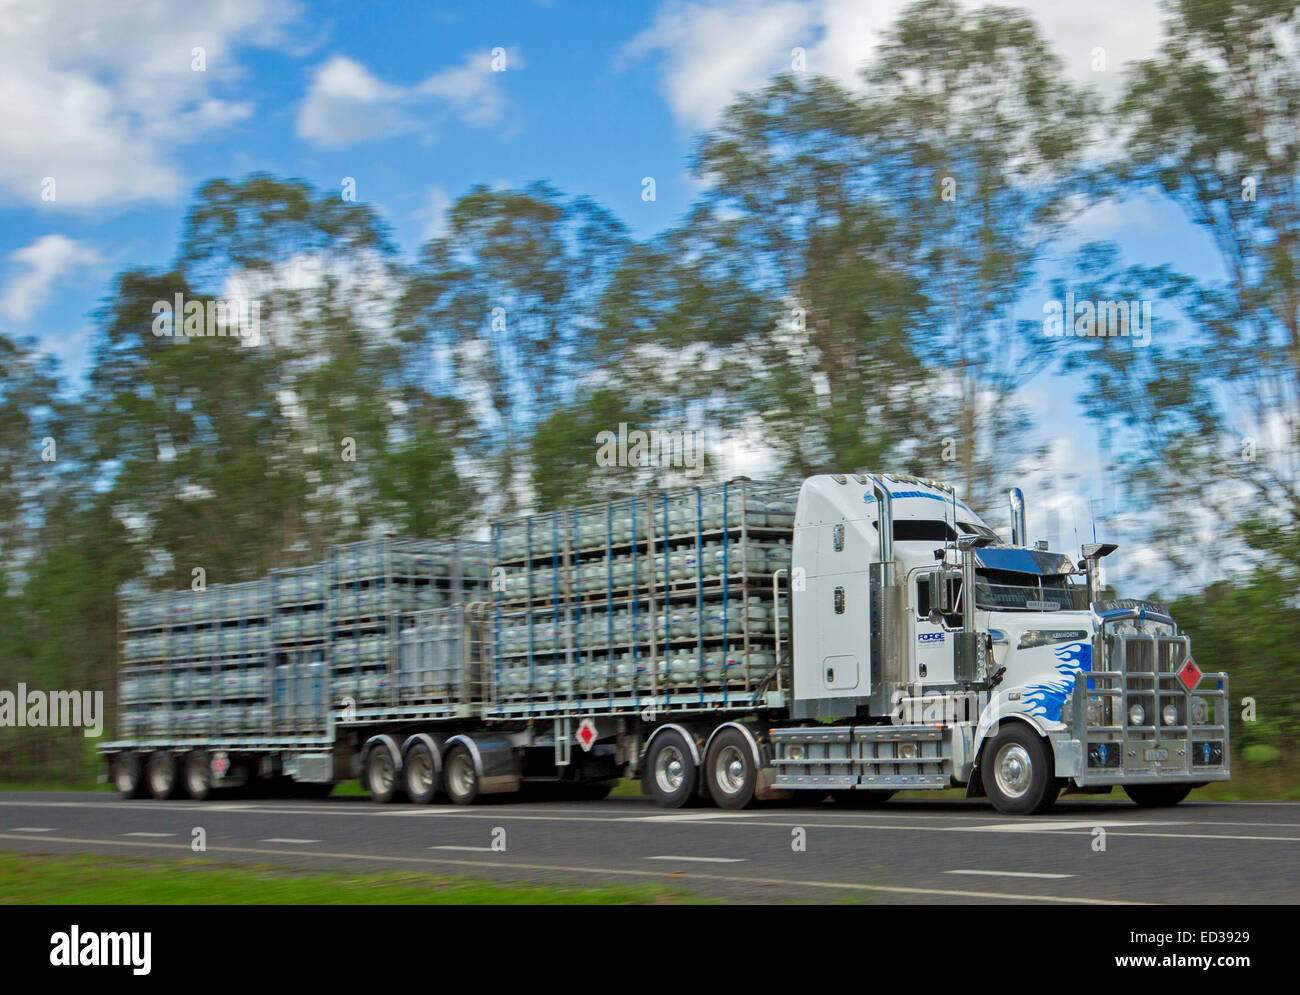 Long semi trailer truck / road train carrying dangerous cargo, cylinders of LP gas, on country road in Australia under blue sky Stock Photo